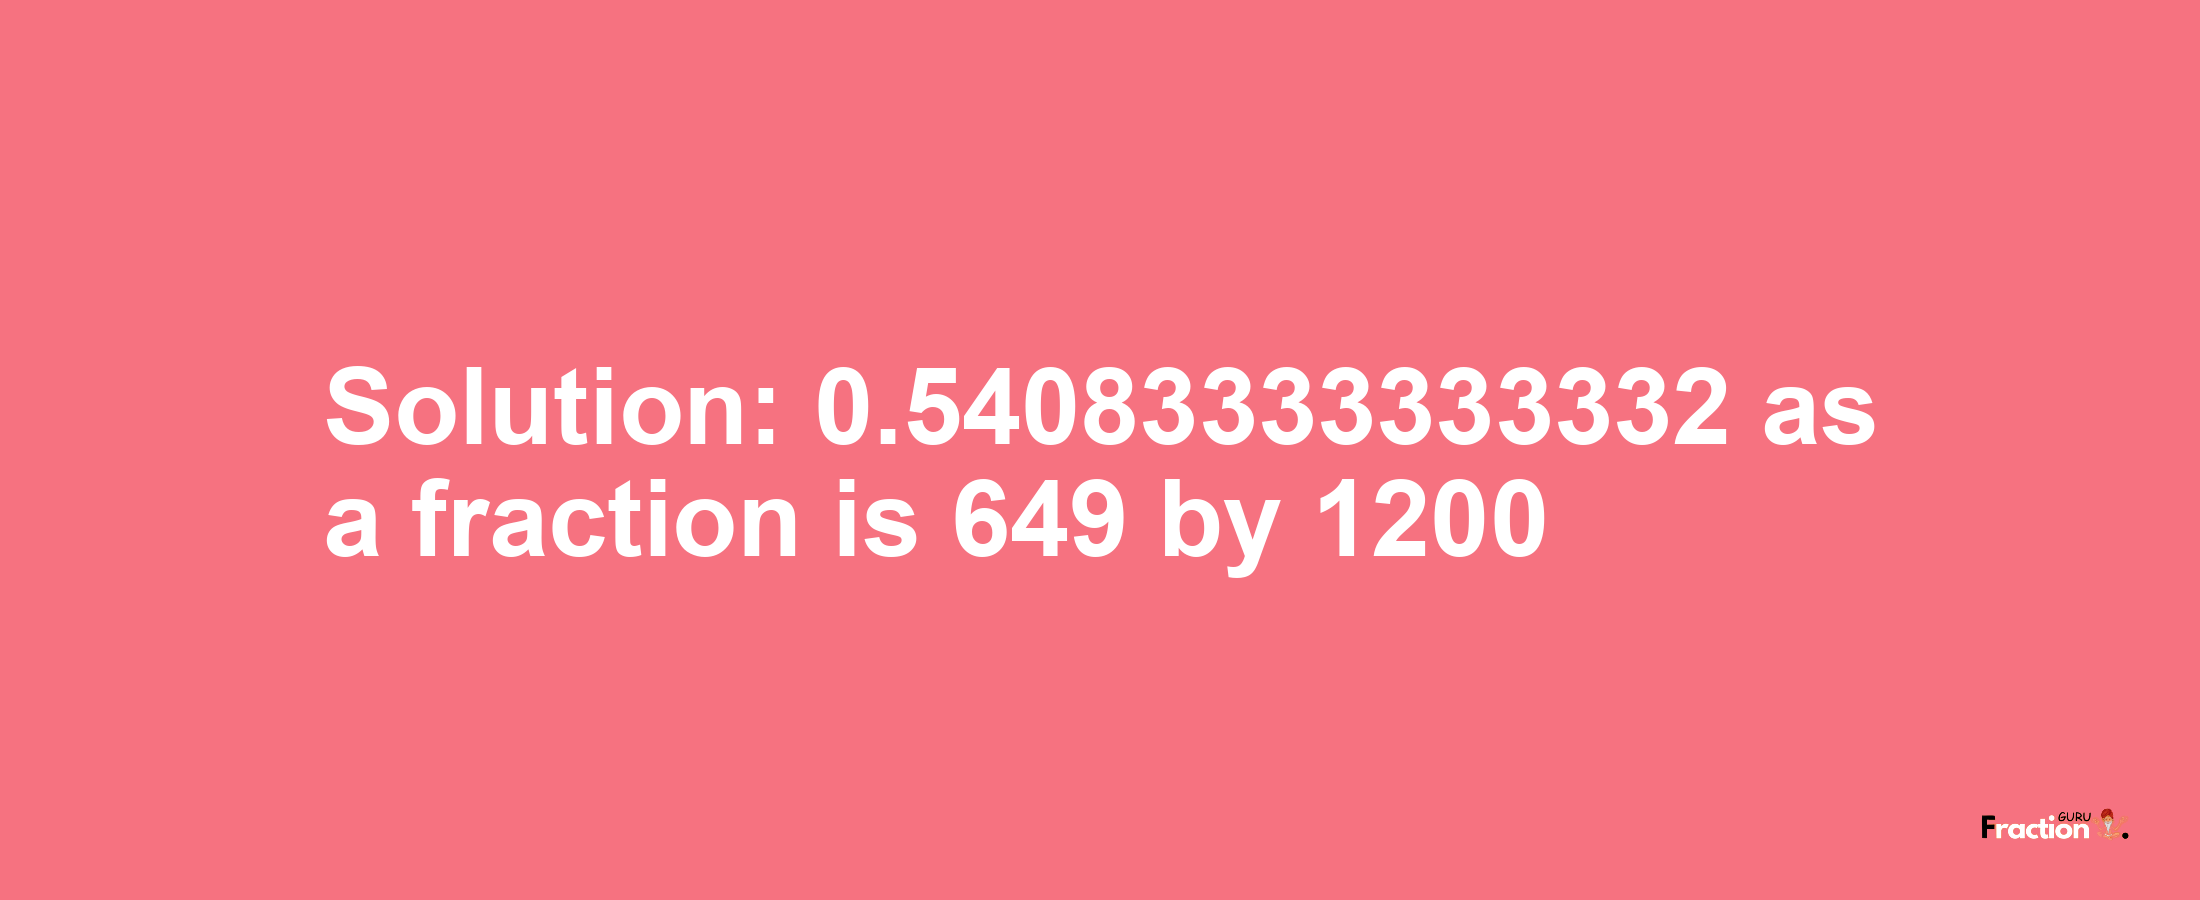 Solution:0.54083333333332 as a fraction is 649/1200